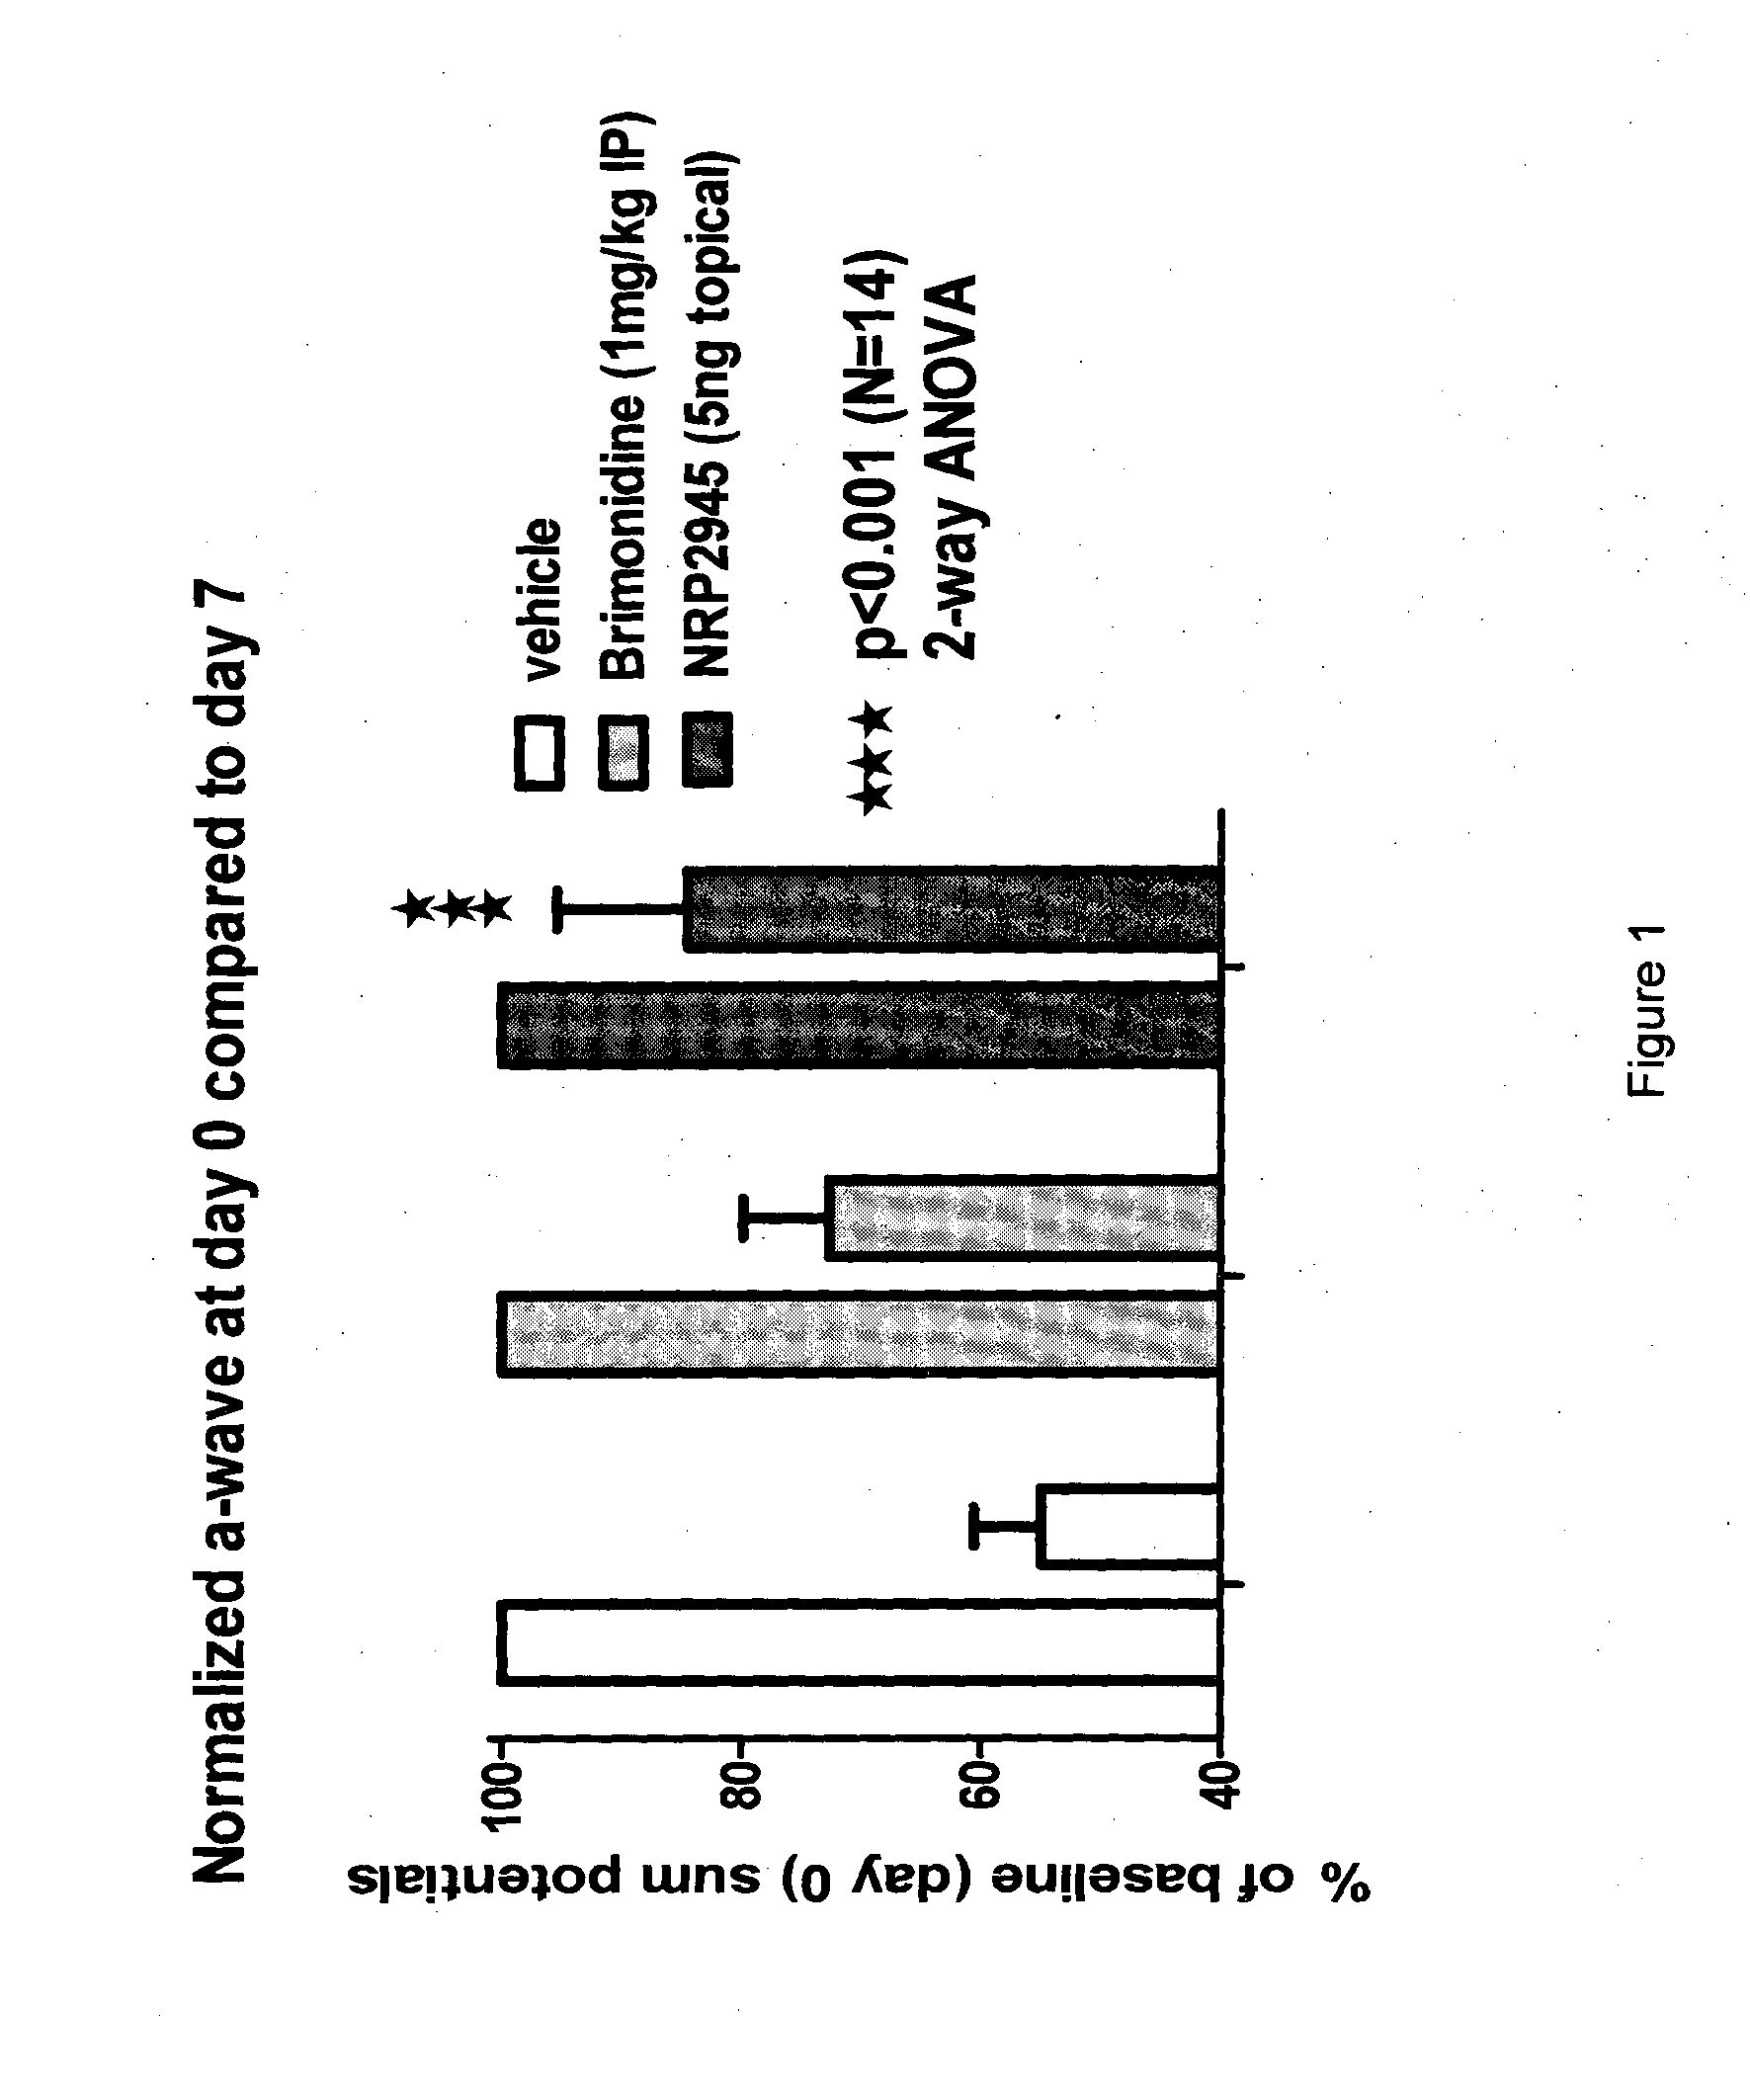 Method of treating optic nerve damage, ophthalmic ischemia or ophthalmic reperfusion injury